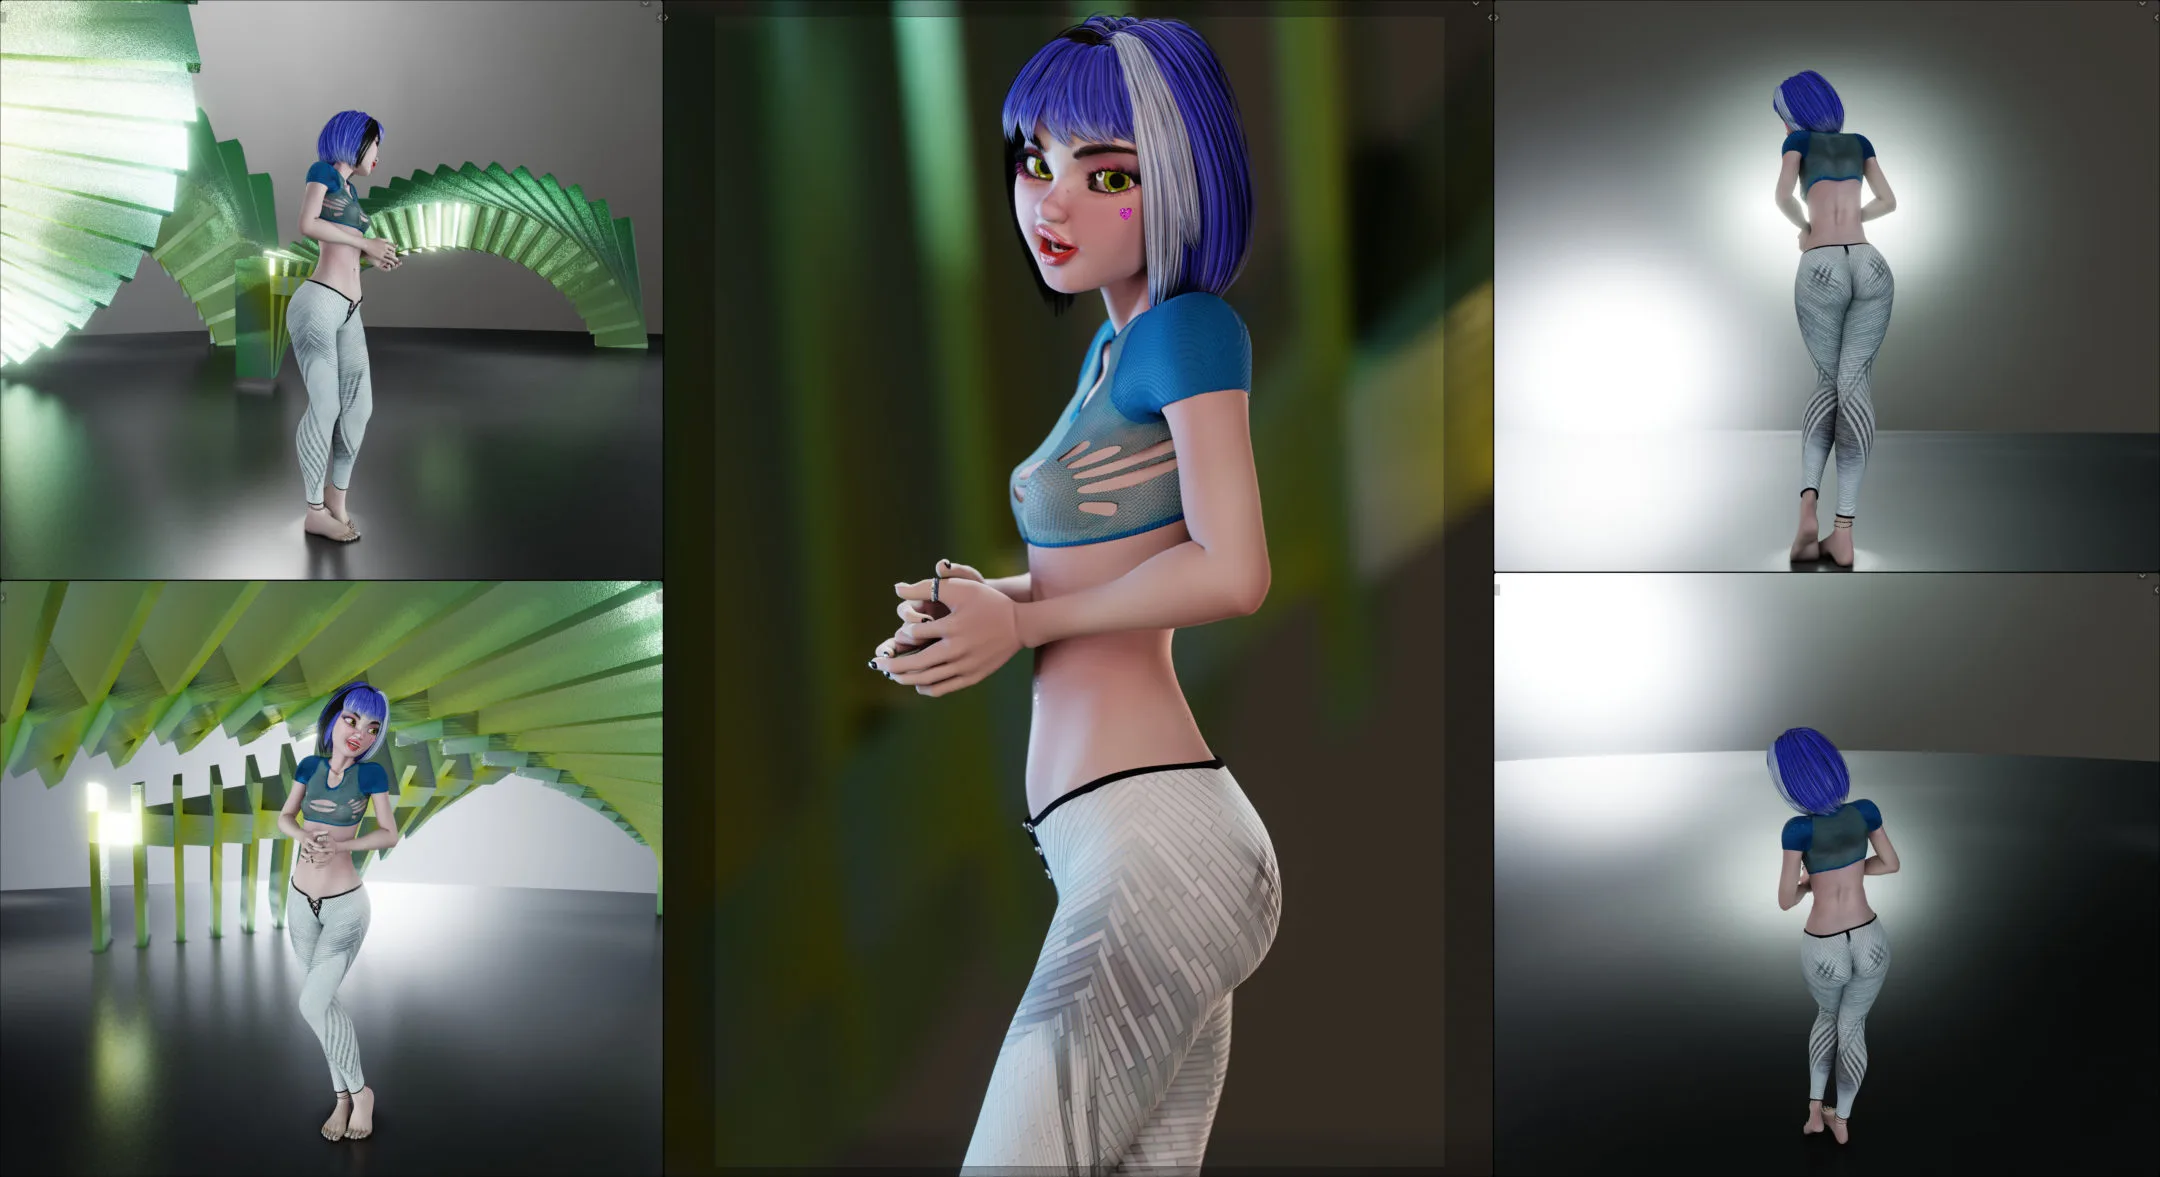 Tailey Fang, Asian Girl - Female Rigged Character